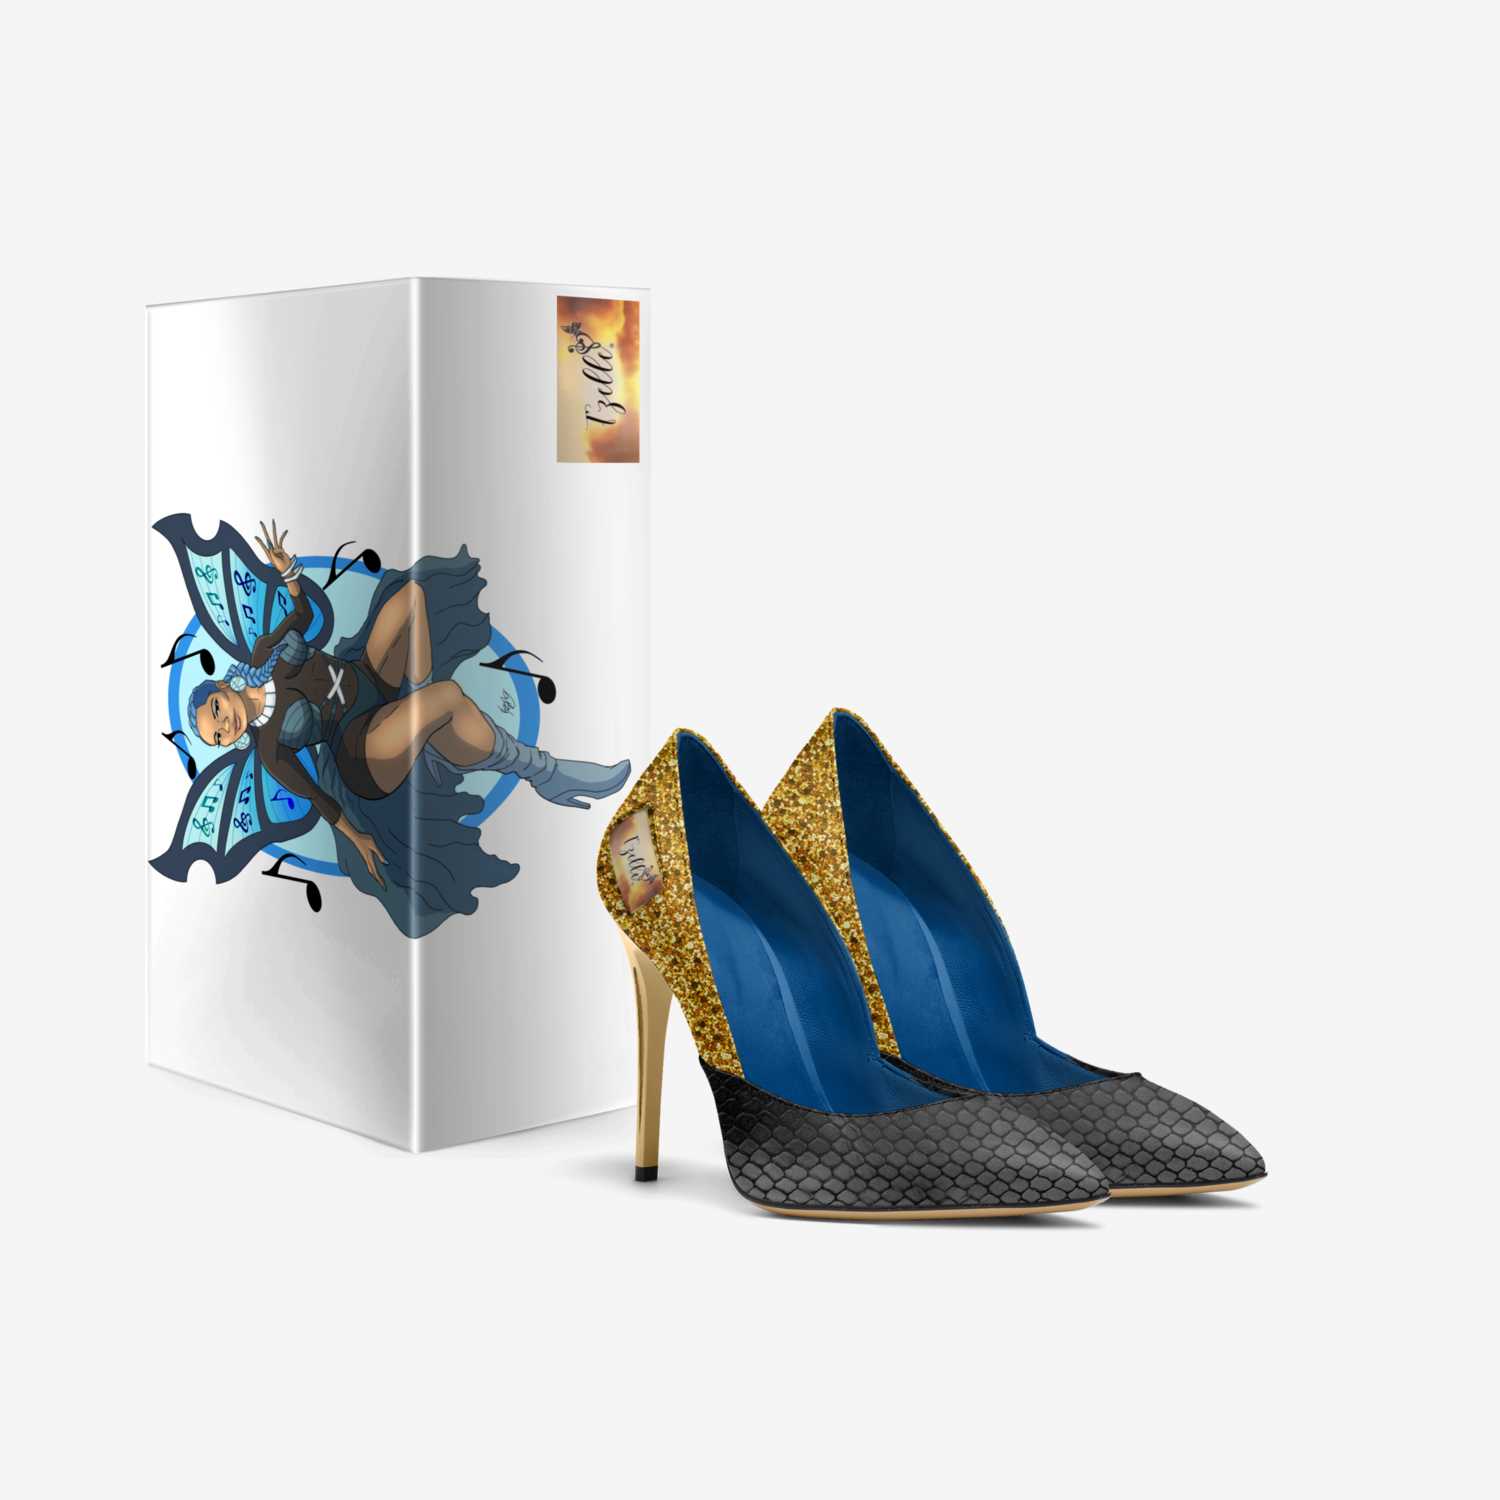 BluVibz T'zelle custom made in Italy shoes by Tiffany T'Zelle | Box view